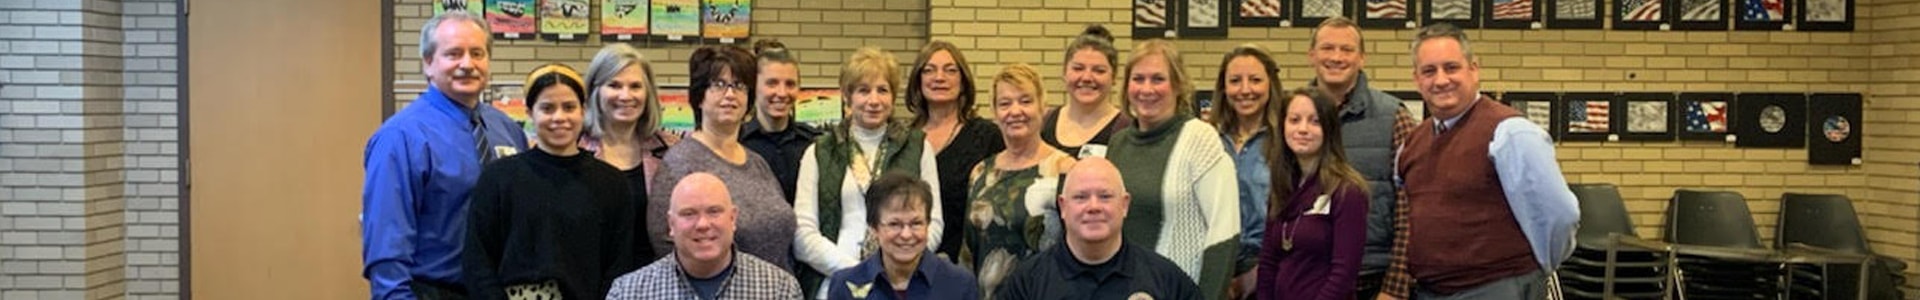 Massapequa Takes Action - Steering Committee RecognitionAwards